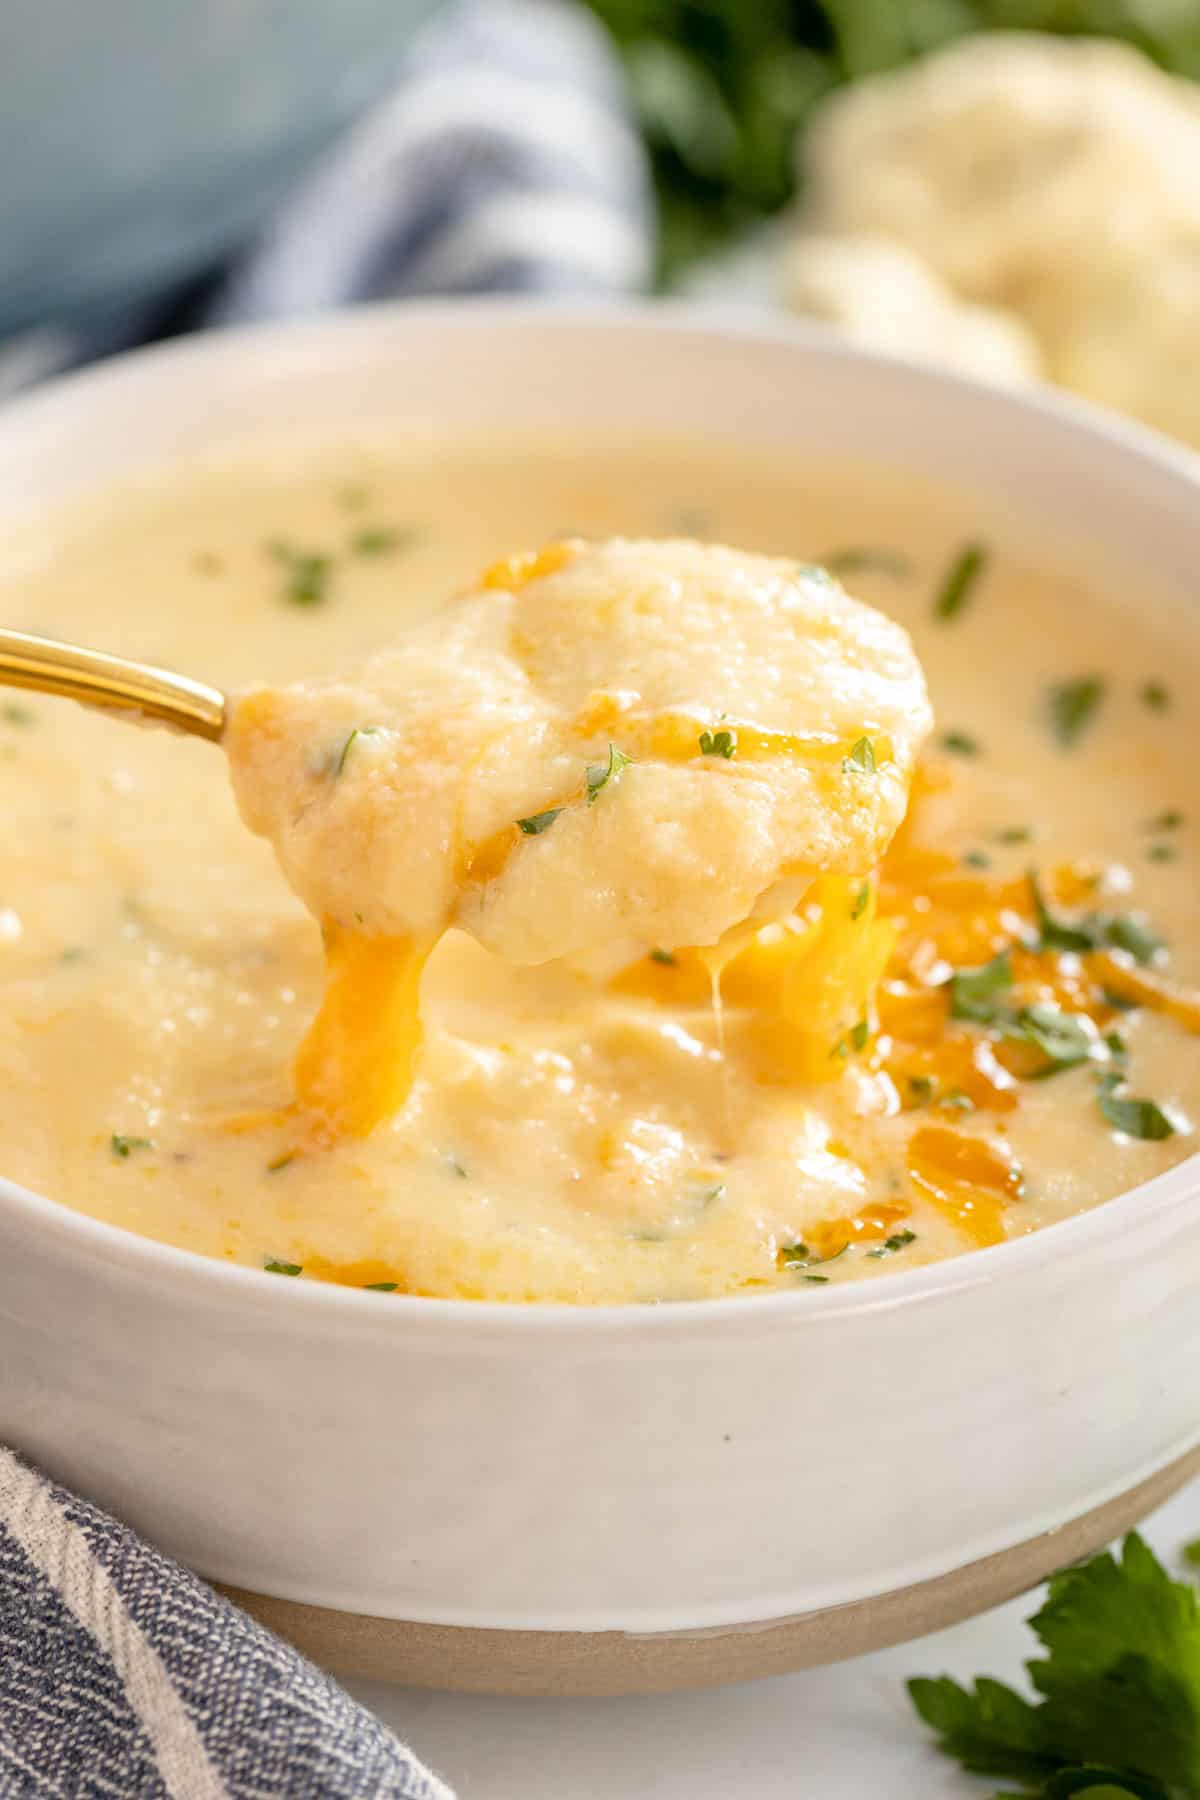 Cauliflower cheese soup in a white bowl with a spoon.